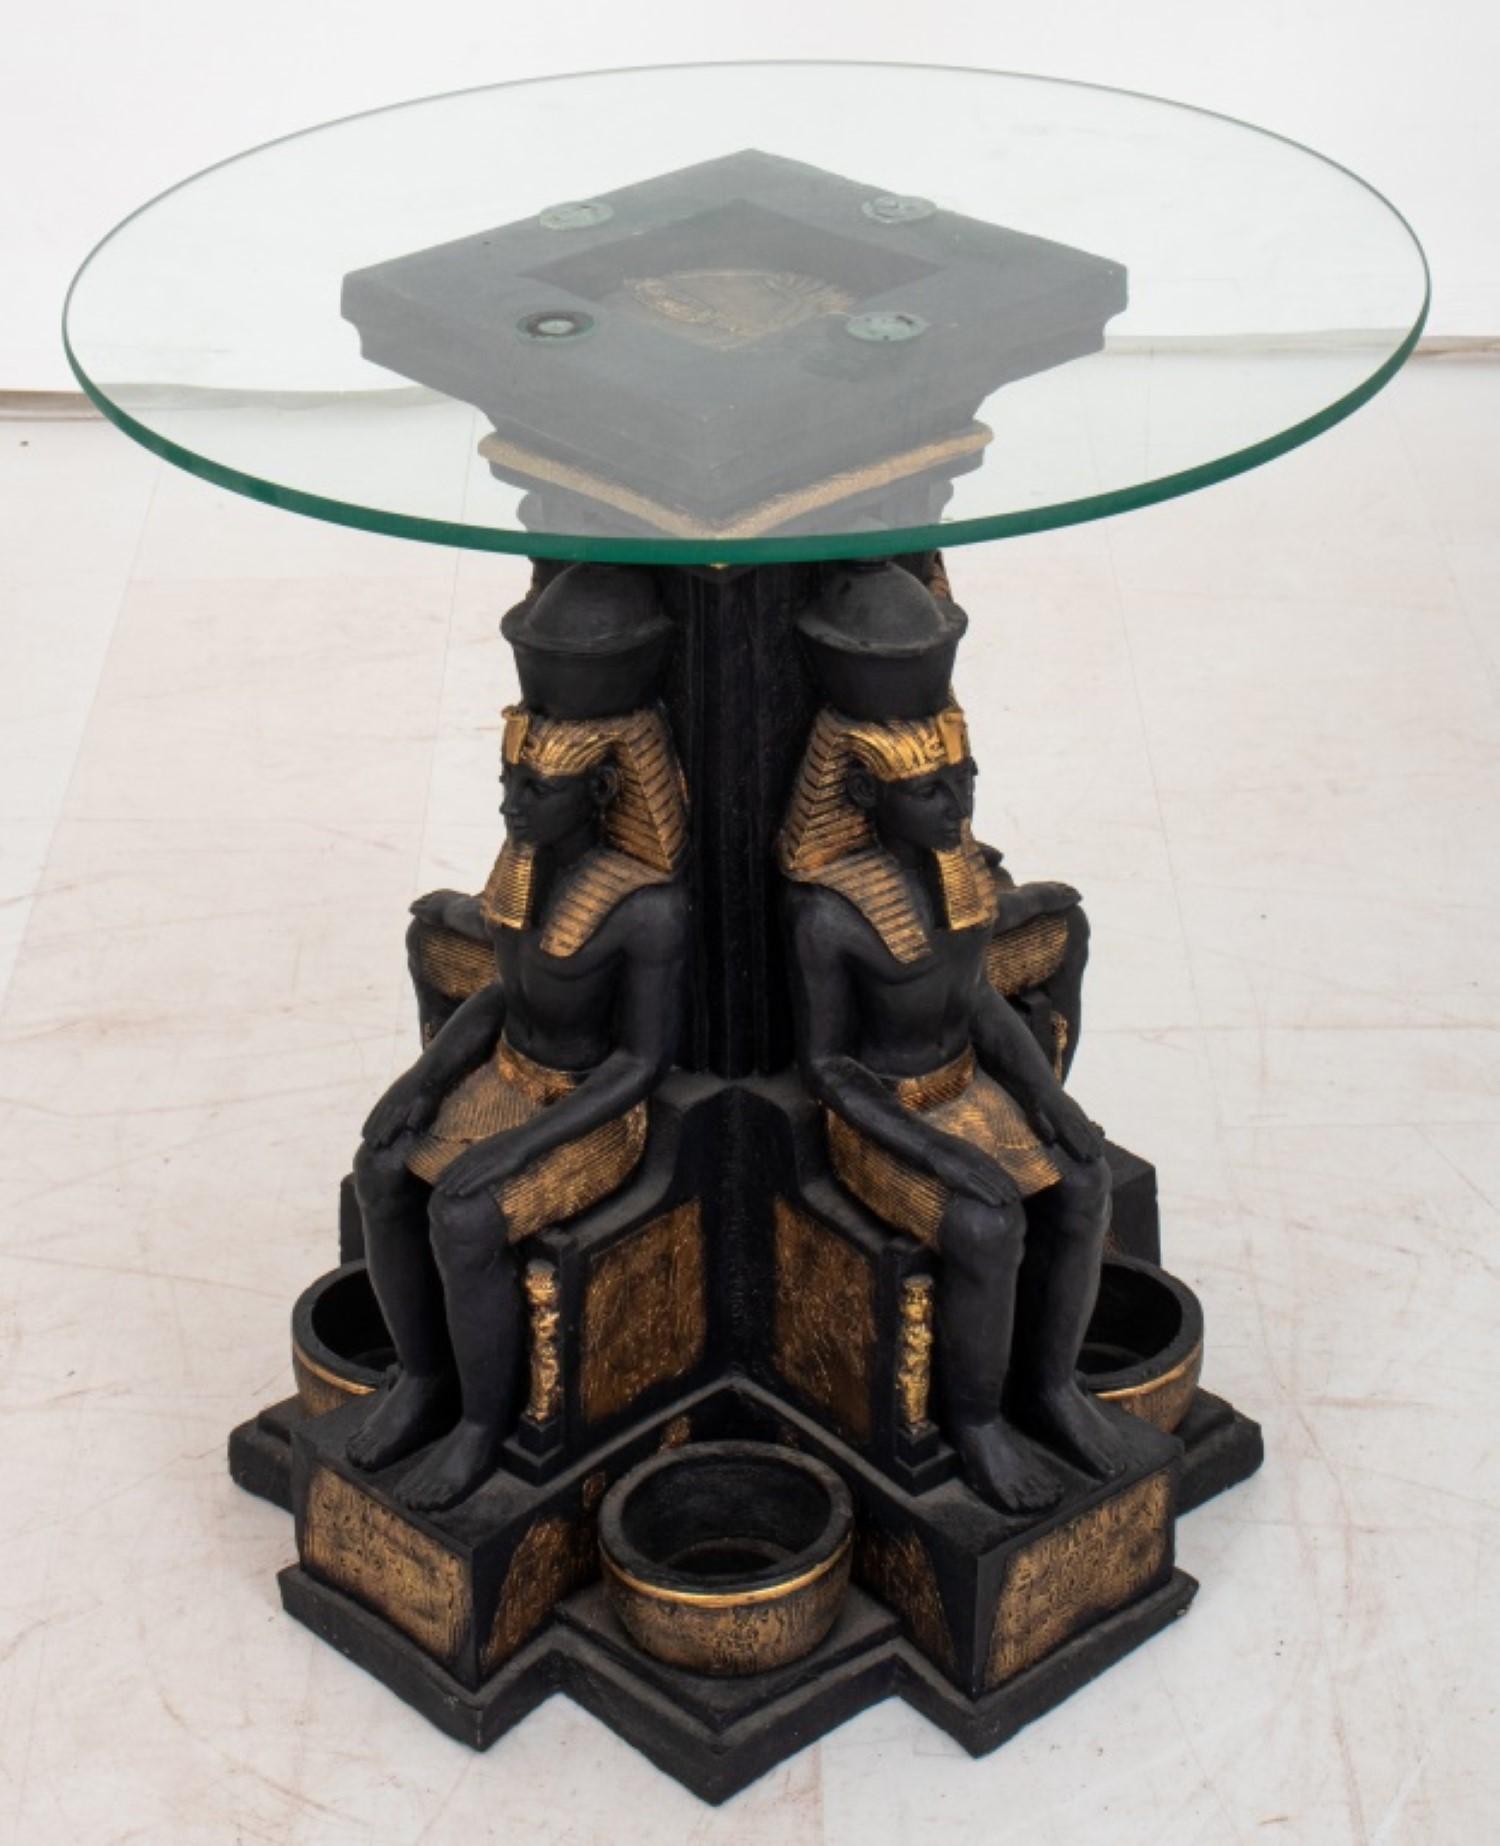 The Egyptian revival style end table has,

Dimensions of 19.5